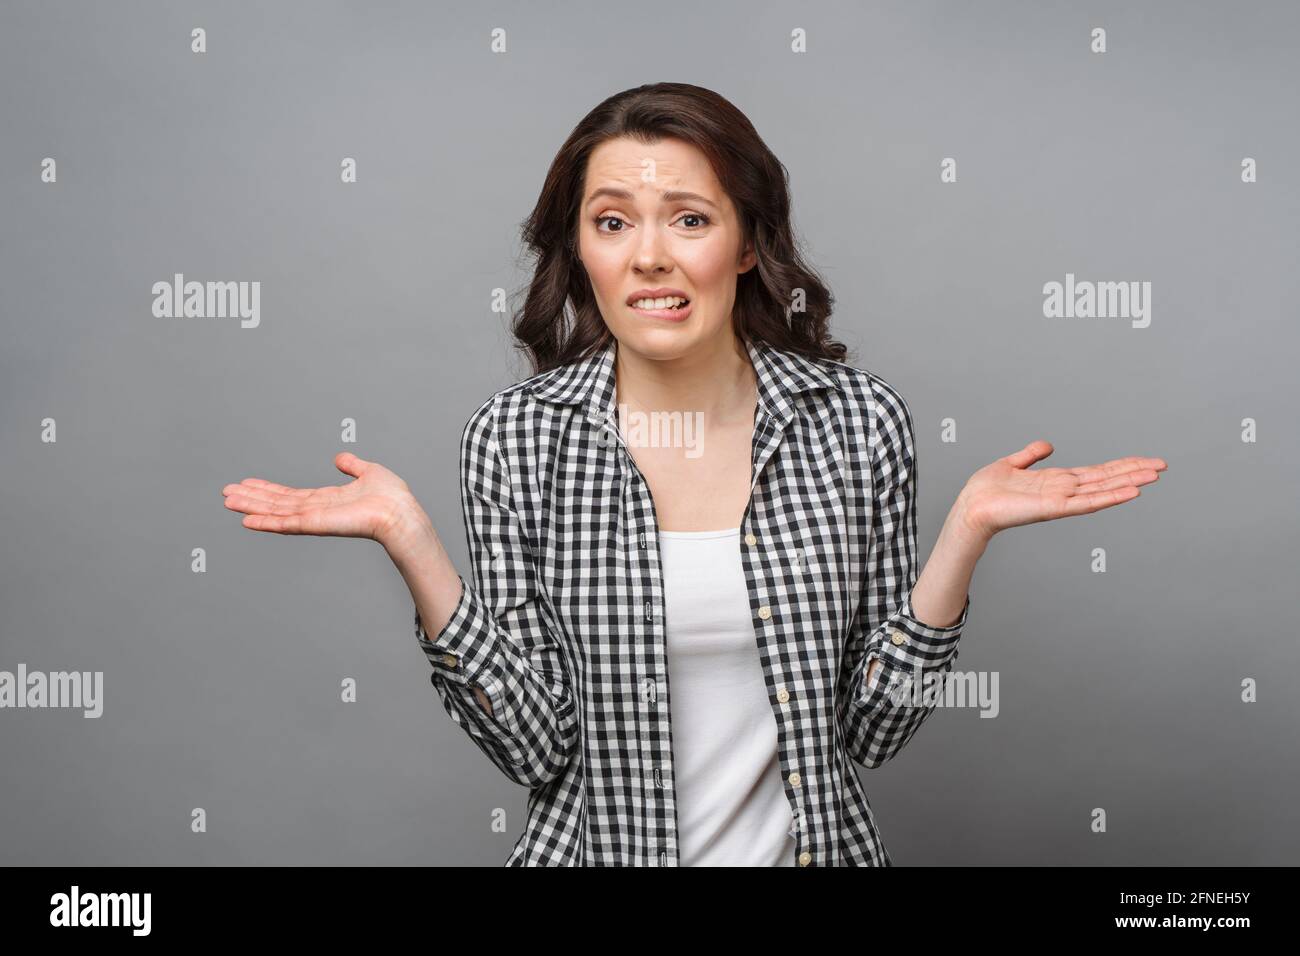 A confused woman stands uncertainly, shrugs her shoulders, can't give an answer to a difficult question, has a confused expression on her face. Stock Photo